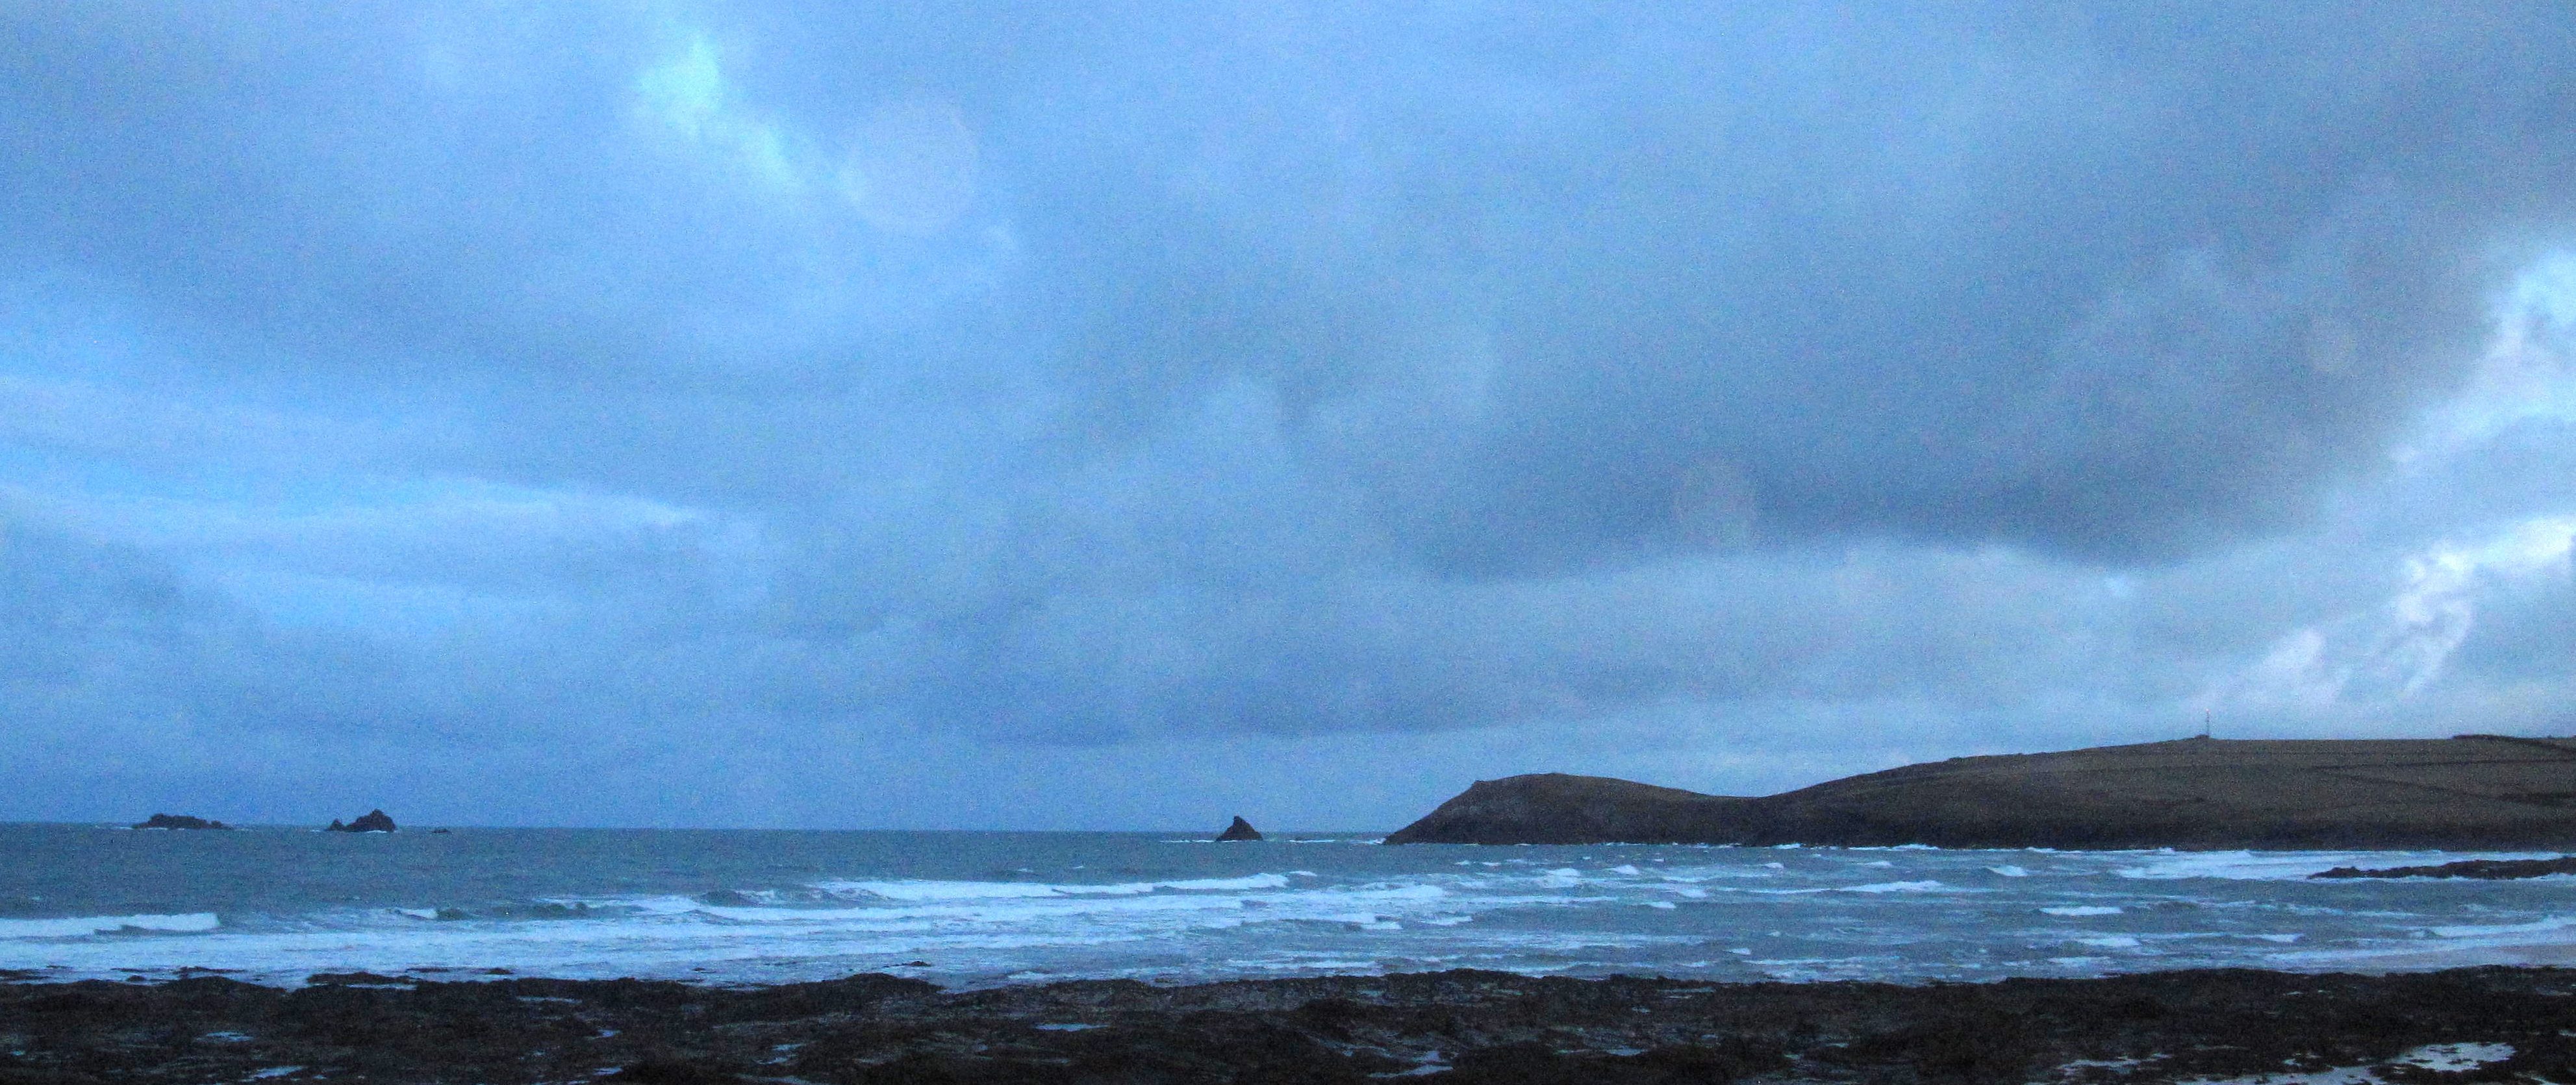 Surf Report for Monday 20th October 2014